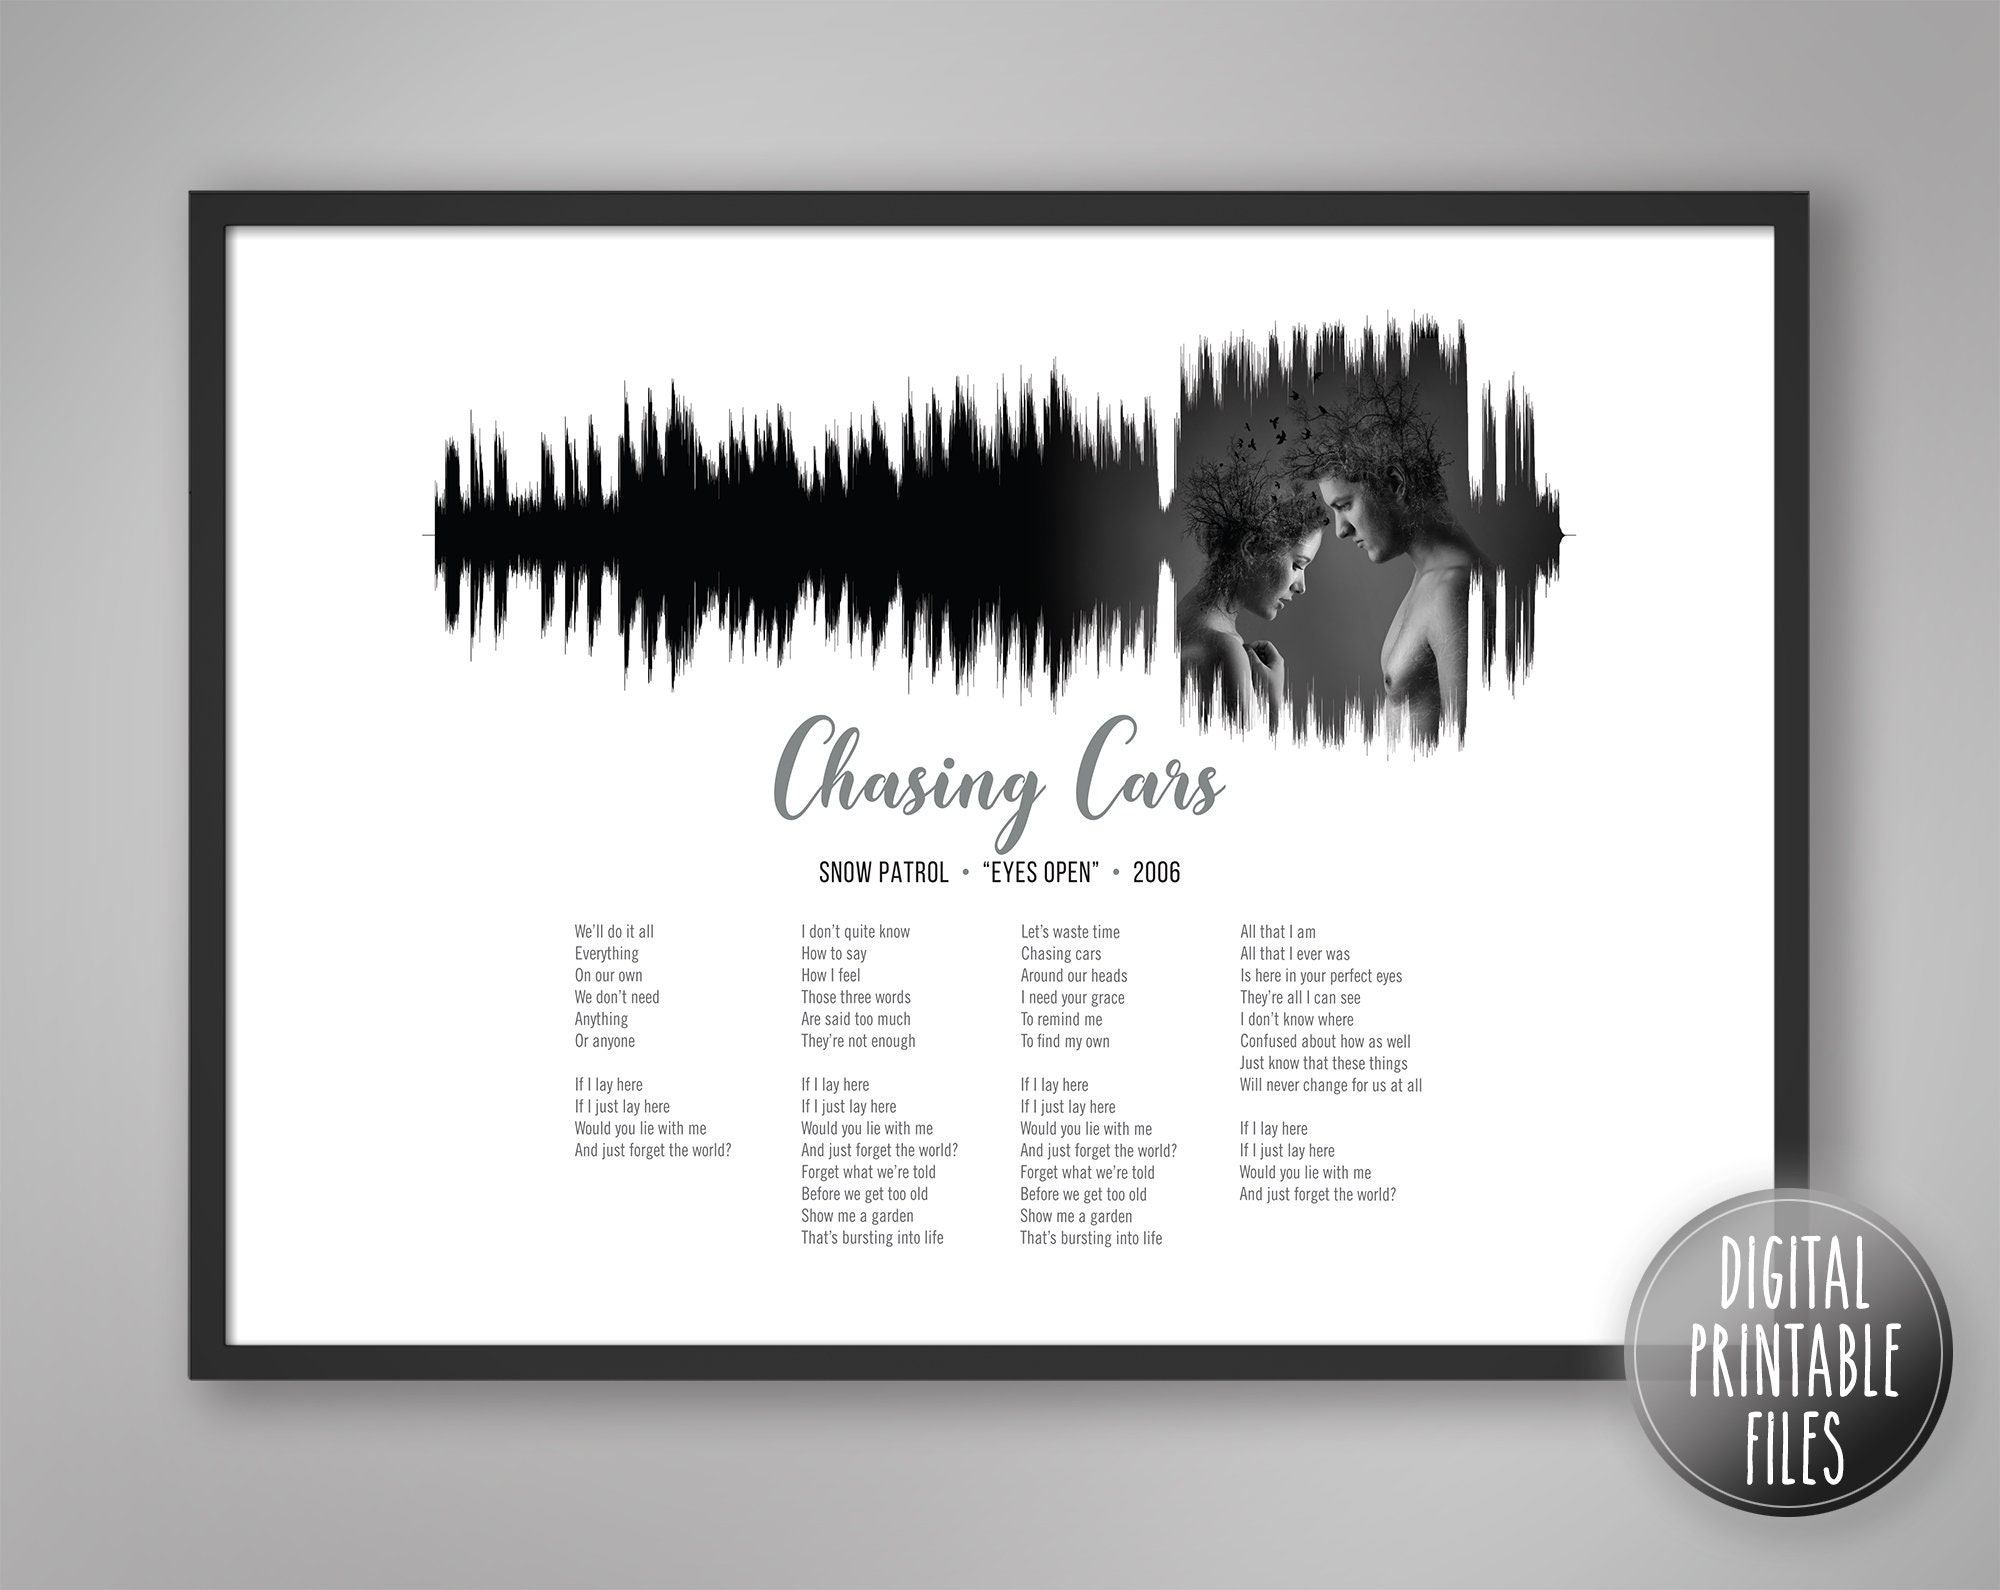 Snow Patrol lyrics - Chasing Cars - If I just lay here, would you lie  with me and just forget the world? - wall art - home decor - sign